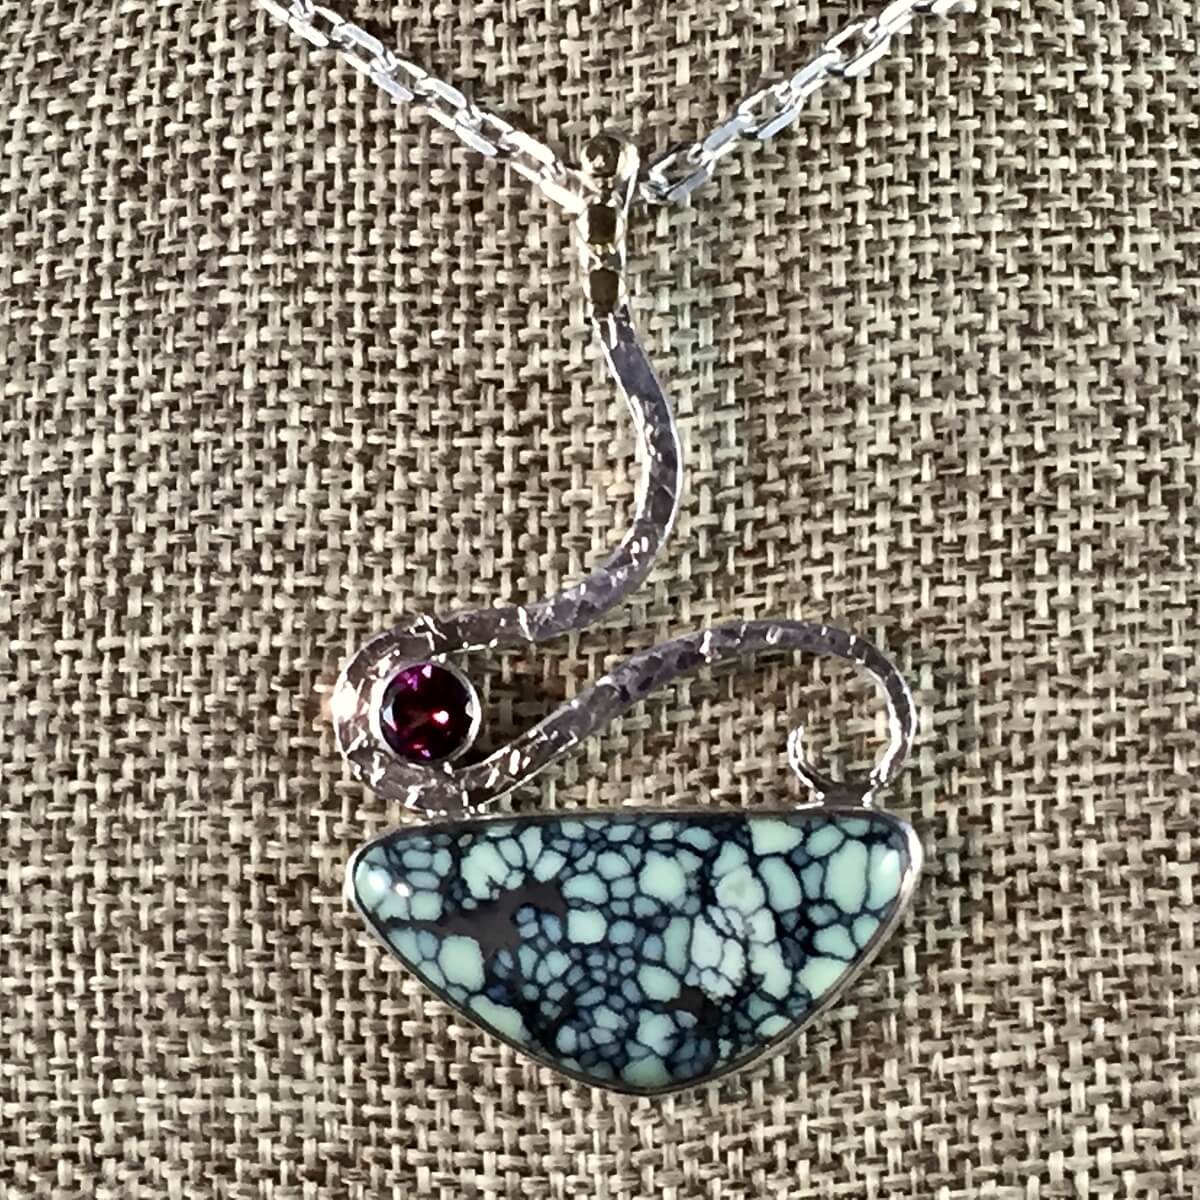 Beautiful New Lander Chalcosiderite and Rhodolite garnet pendant!
Set in sterling and fine silver, with 18K accents and hidden bail.
This is #2 of 190, from the Limited Edition "19" Collection. Also featured in the July issue of Rock & gem Magazine.
https://dancing-raven-stoneworks-llc.square.site/product/drs-19-202-19-collection-new-lander-pendant/85?cs=true